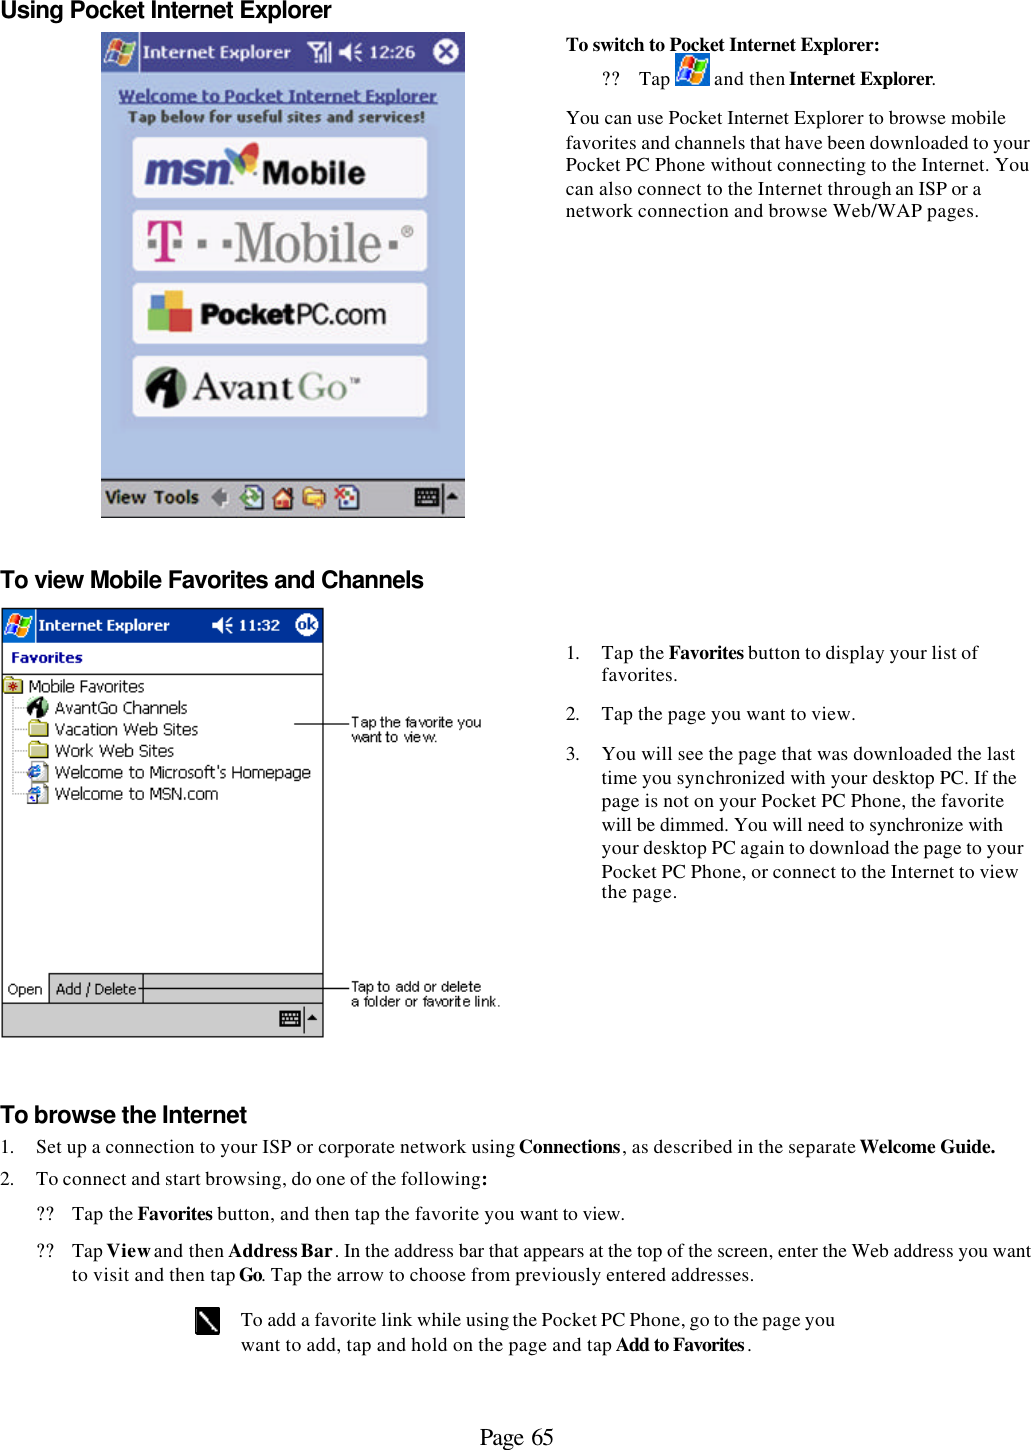 Page 65 Using Pocket Internet Explorer  To switch to Pocket Internet Explorer: ?? Tap   and then Internet Explorer. You can use Pocket Internet Explorer to browse mobile favorites and channels that have been downloaded to your Pocket PC Phone without connecting to the Internet. You can also connect to the Internet through an ISP or a network connection and browse Web/WAP pages. To view Mobile Favorites and Channels  1. Tap the Favorites button to display your list of favorites.  2. Tap the page you want to view.  3. You will see the page that was downloaded the last time you synchronized with your desktop PC. If the page is not on your Pocket PC Phone, the favorite will be dimmed. You will need to synchronize with your desktop PC again to download the page to your Pocket PC Phone, or connect to the Internet to view the page. To browse the Internet 1. Set up a connection to your ISP or corporate network using Connections, as described in the separate Welcome Guide. 2. To connect and start browsing, do one of the following: ?? Tap the Favorites button, and then tap the favorite you want to view. ?? Tap View and then Address Bar. In the address bar that appears at the top of the screen, enter the Web address you want to visit and then tap Go. Tap the arrow to choose from previously entered addresses.   To add a favorite link while using the Pocket PC Phone, go to the page you want to add, tap and hold on the page and tap Add to Favorites.  